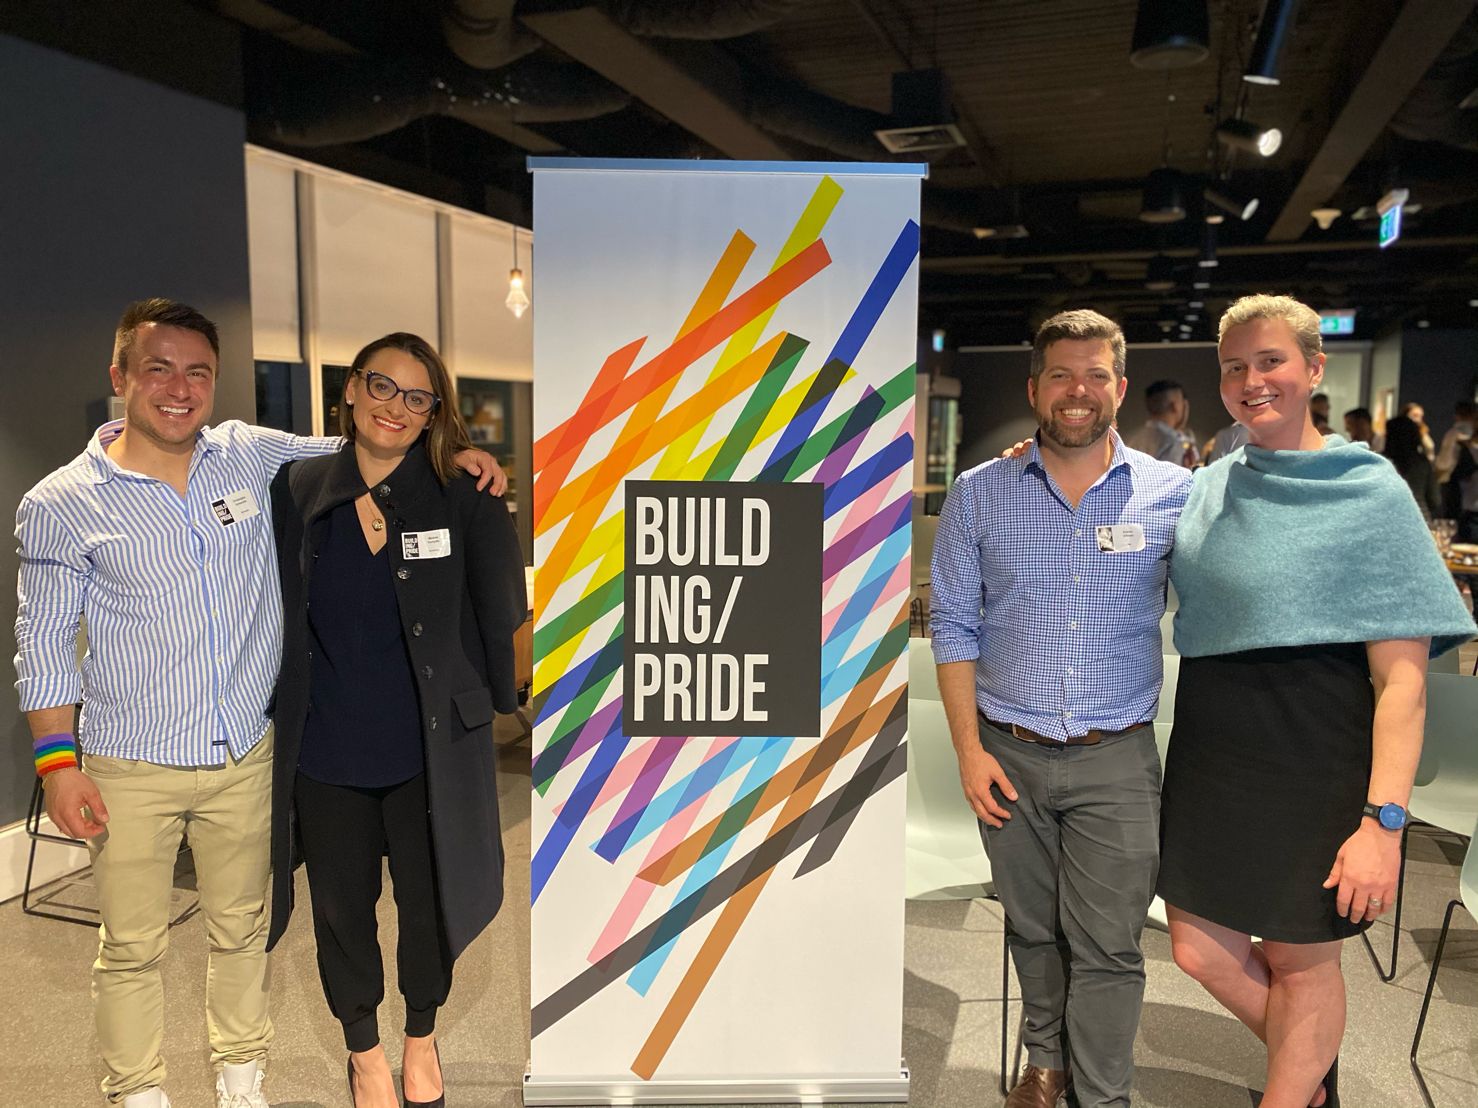 buildingpride leaders with banner